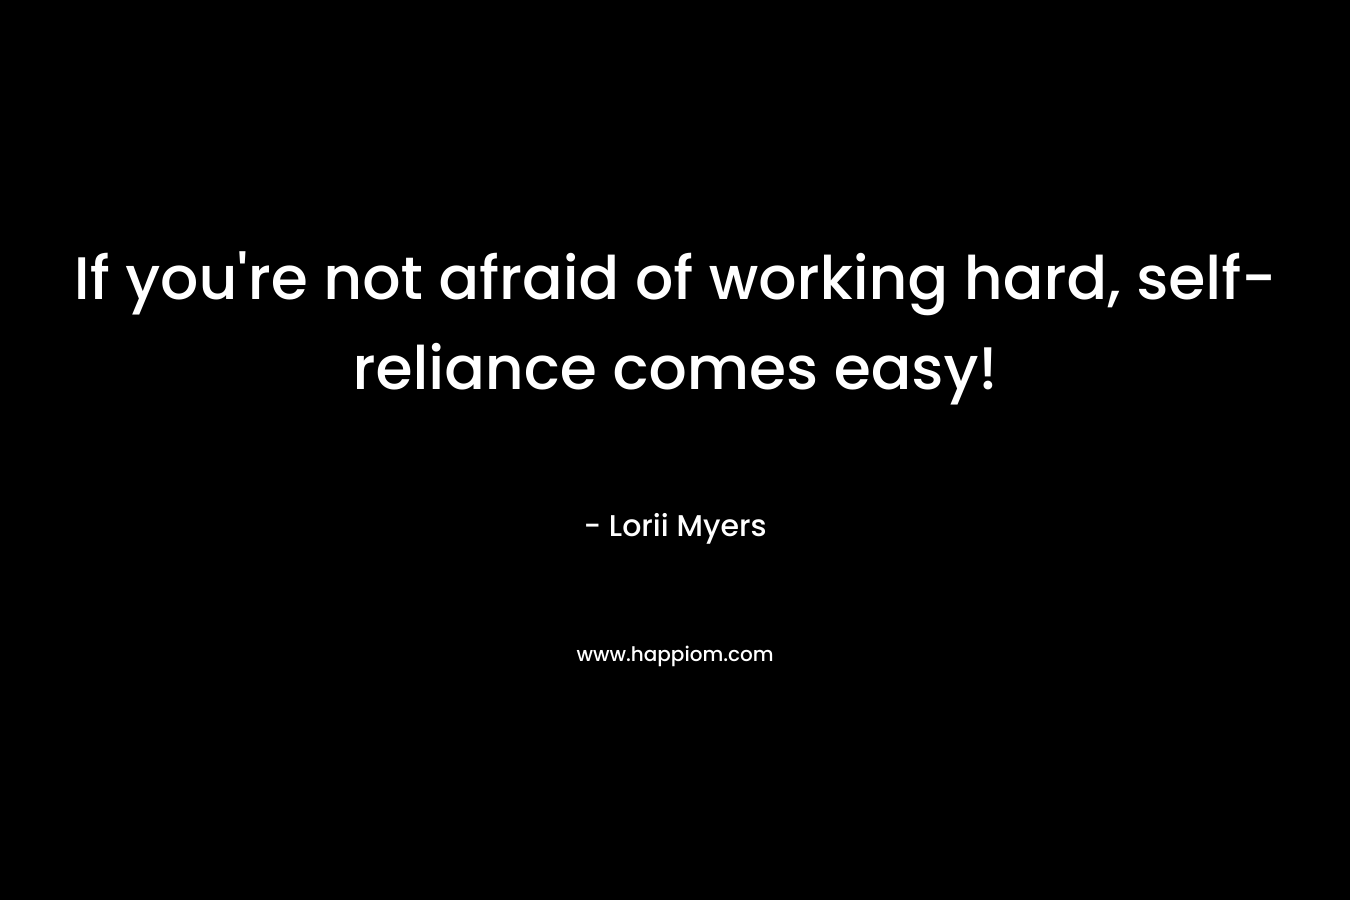 If you’re not afraid of working hard, self-reliance comes easy! – Lorii Myers